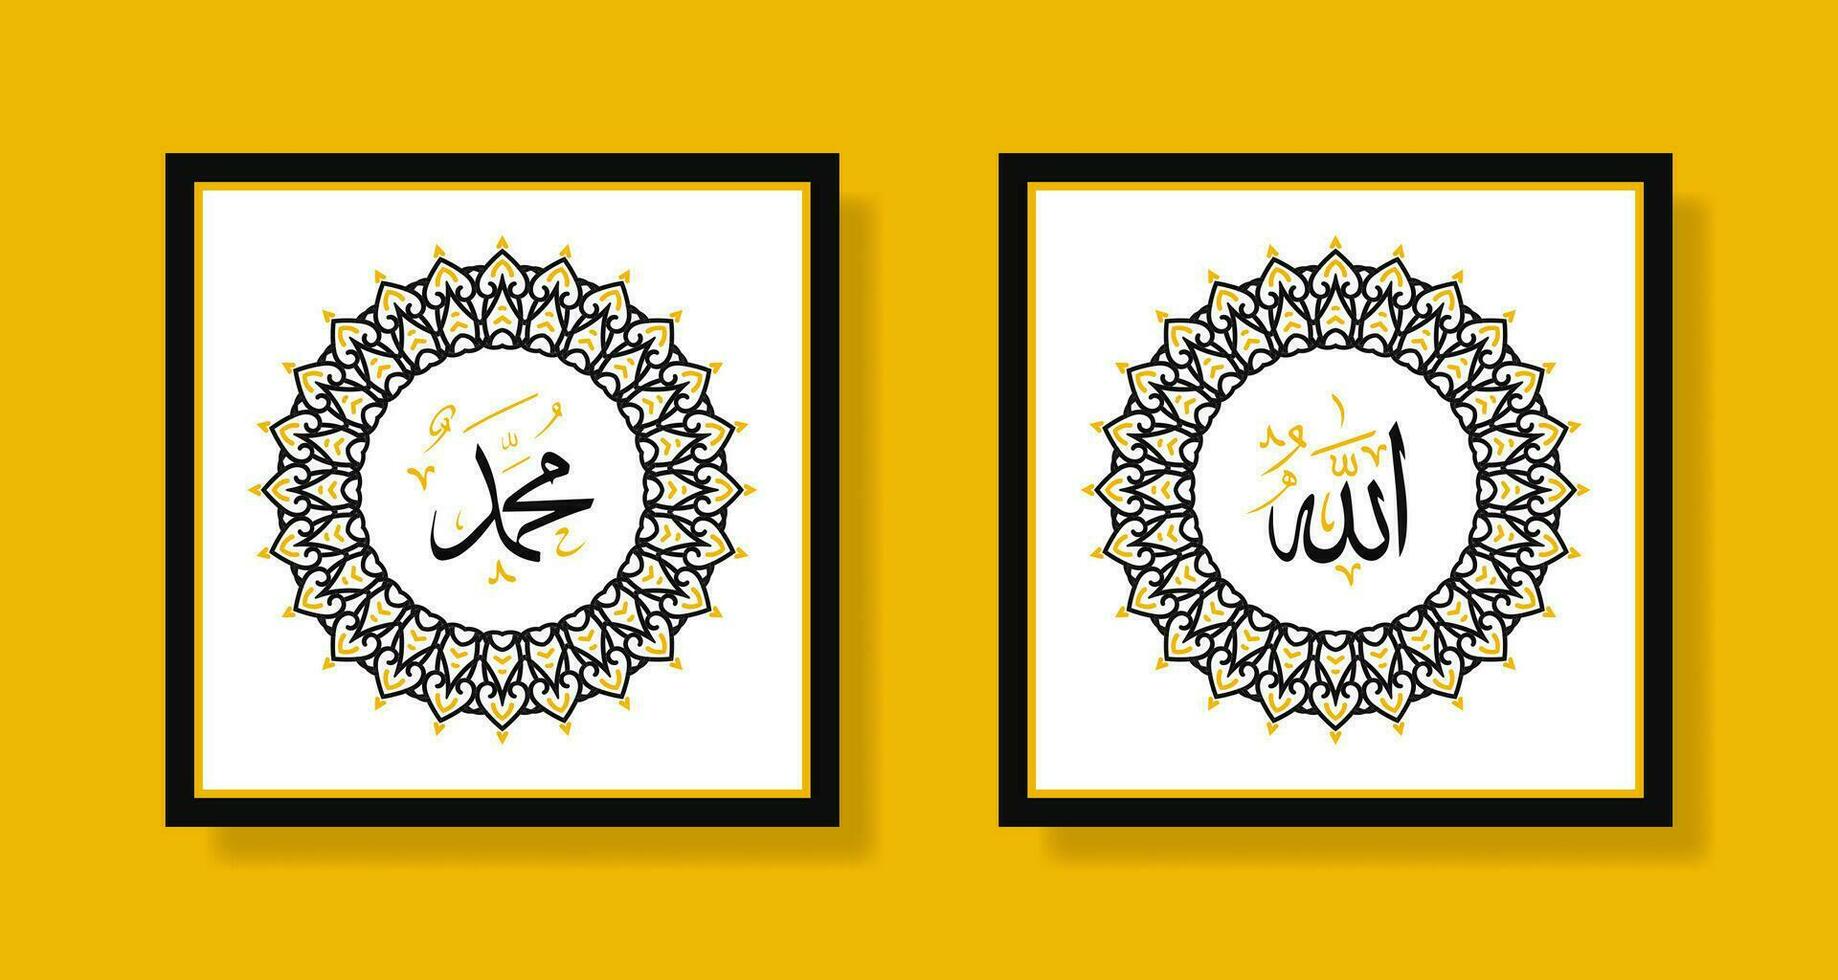 Allah muhammad Name of Allah muhammad, Allah muhammad Arabic islamic calligraphy wall art, with poster frame and retro color vector